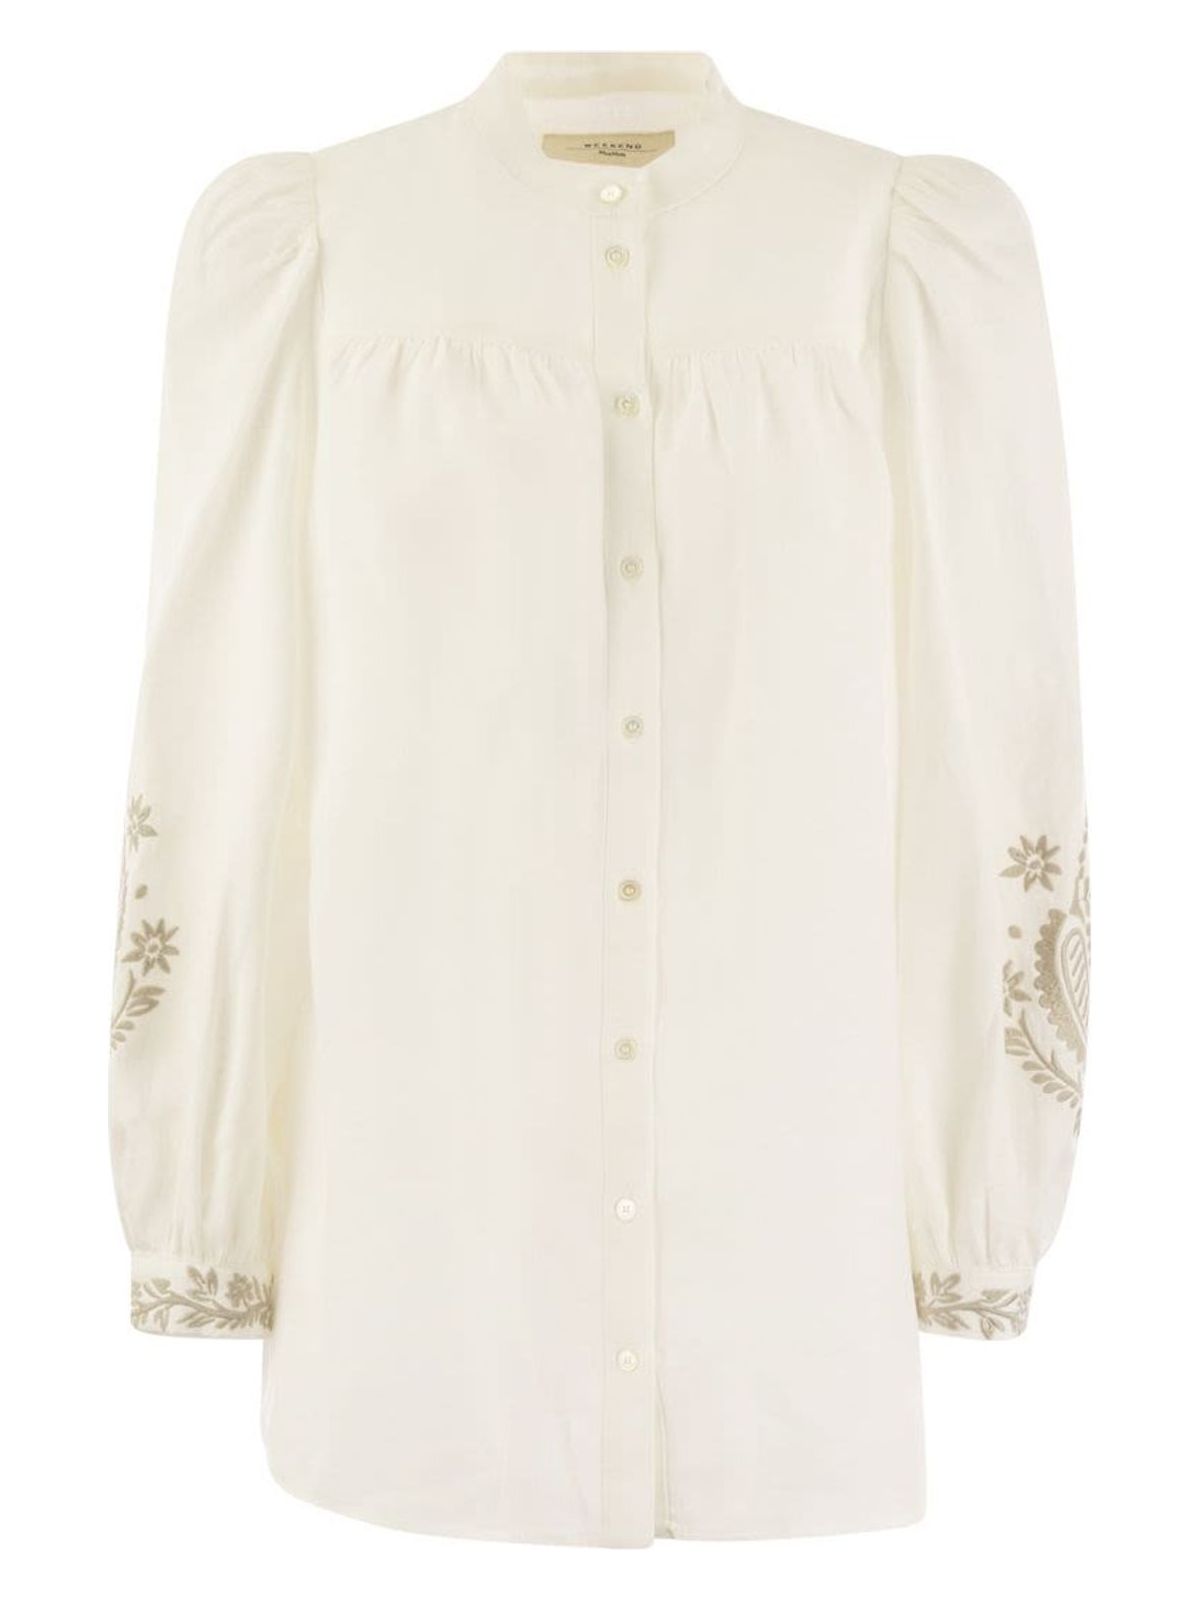 027 WEEKEND MAX MARA CARNIA - LINEN CLOTH SHIRT WITH EMBROIDERY